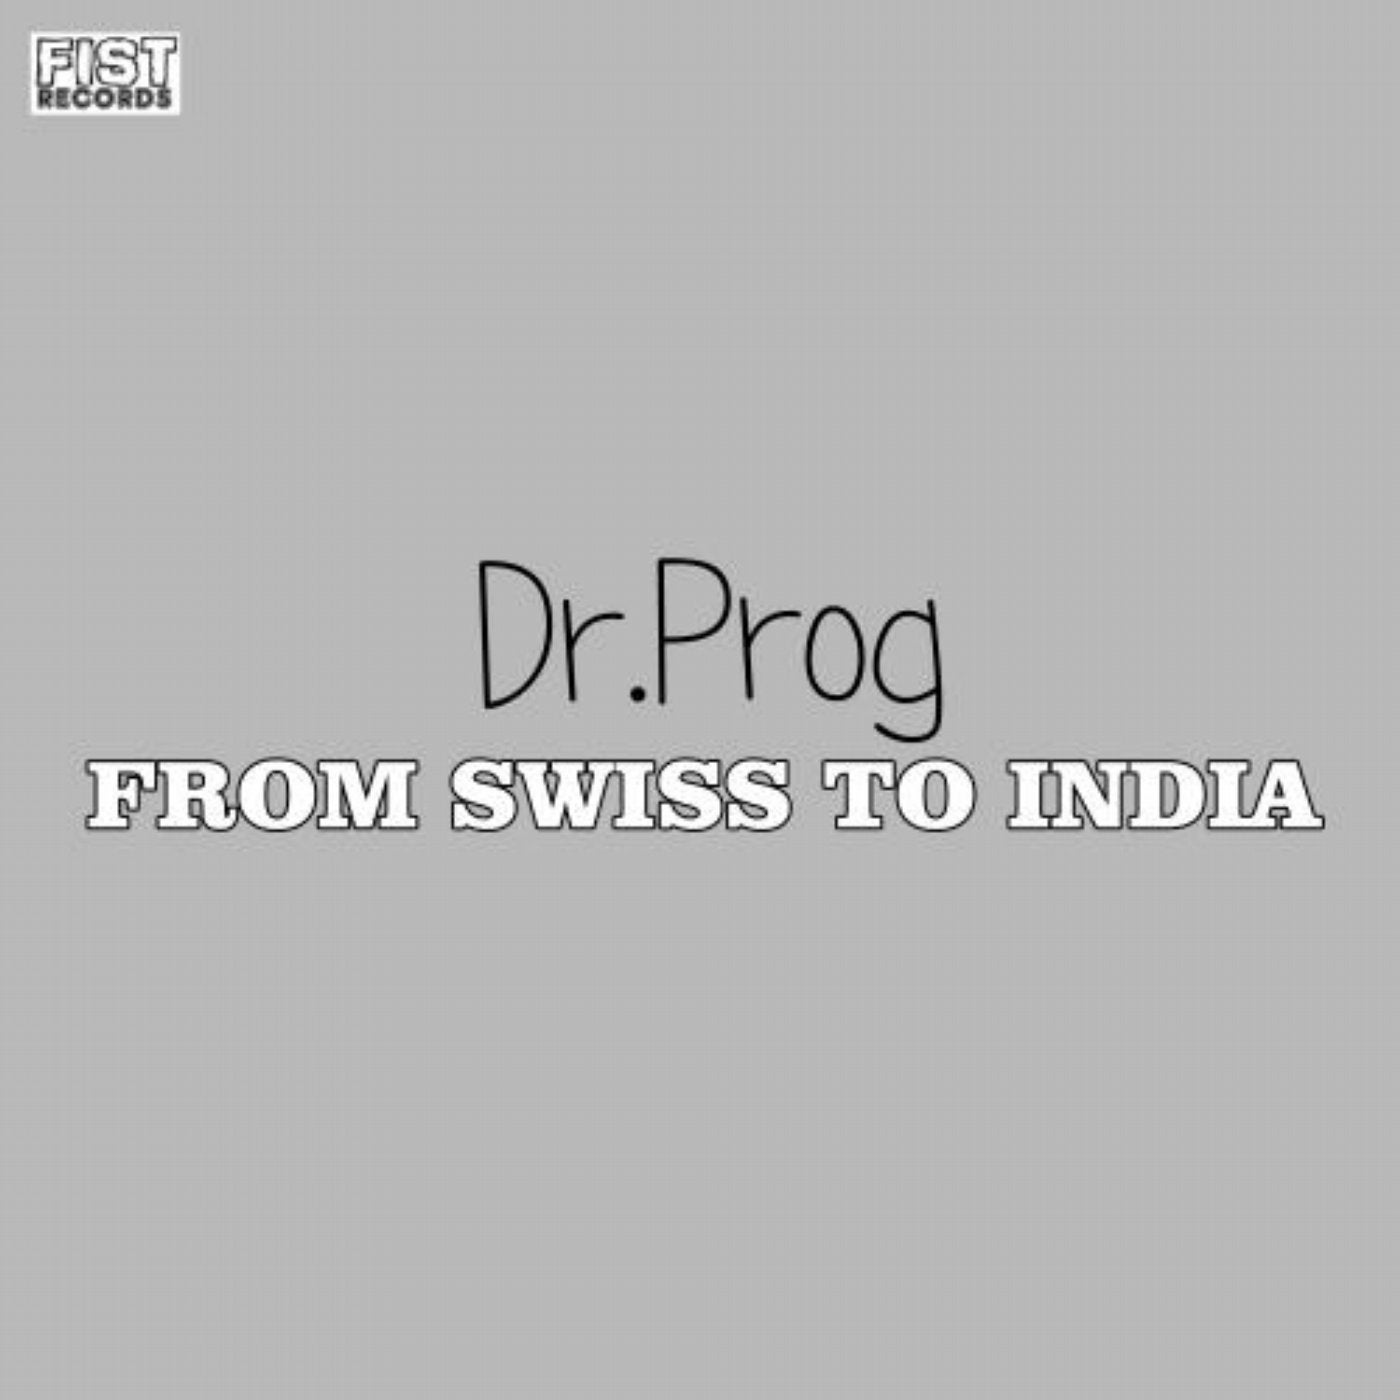 From Swiss to India